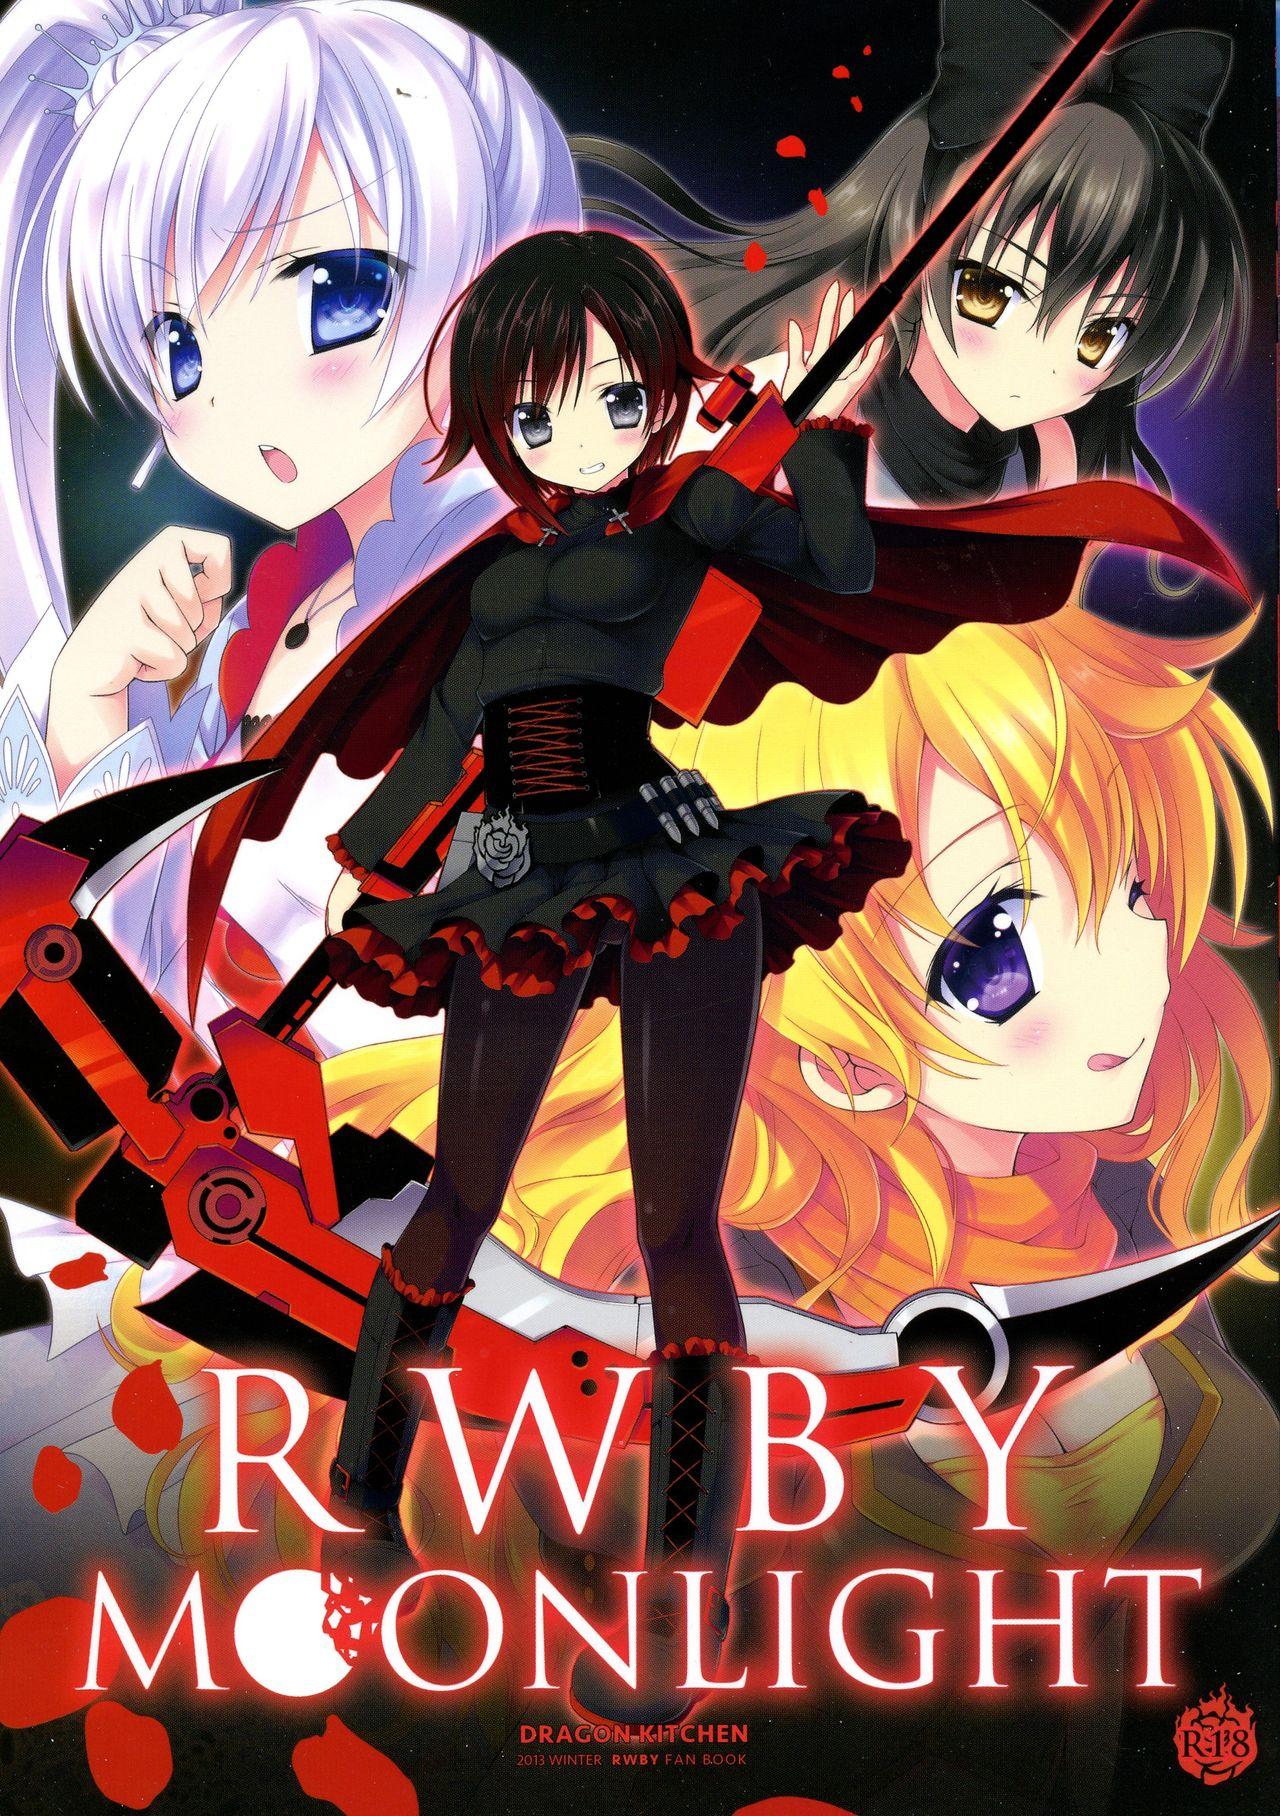 Snatch RWBY MOONLIGHT - Rwby Doggystyle Porn - Picture 1